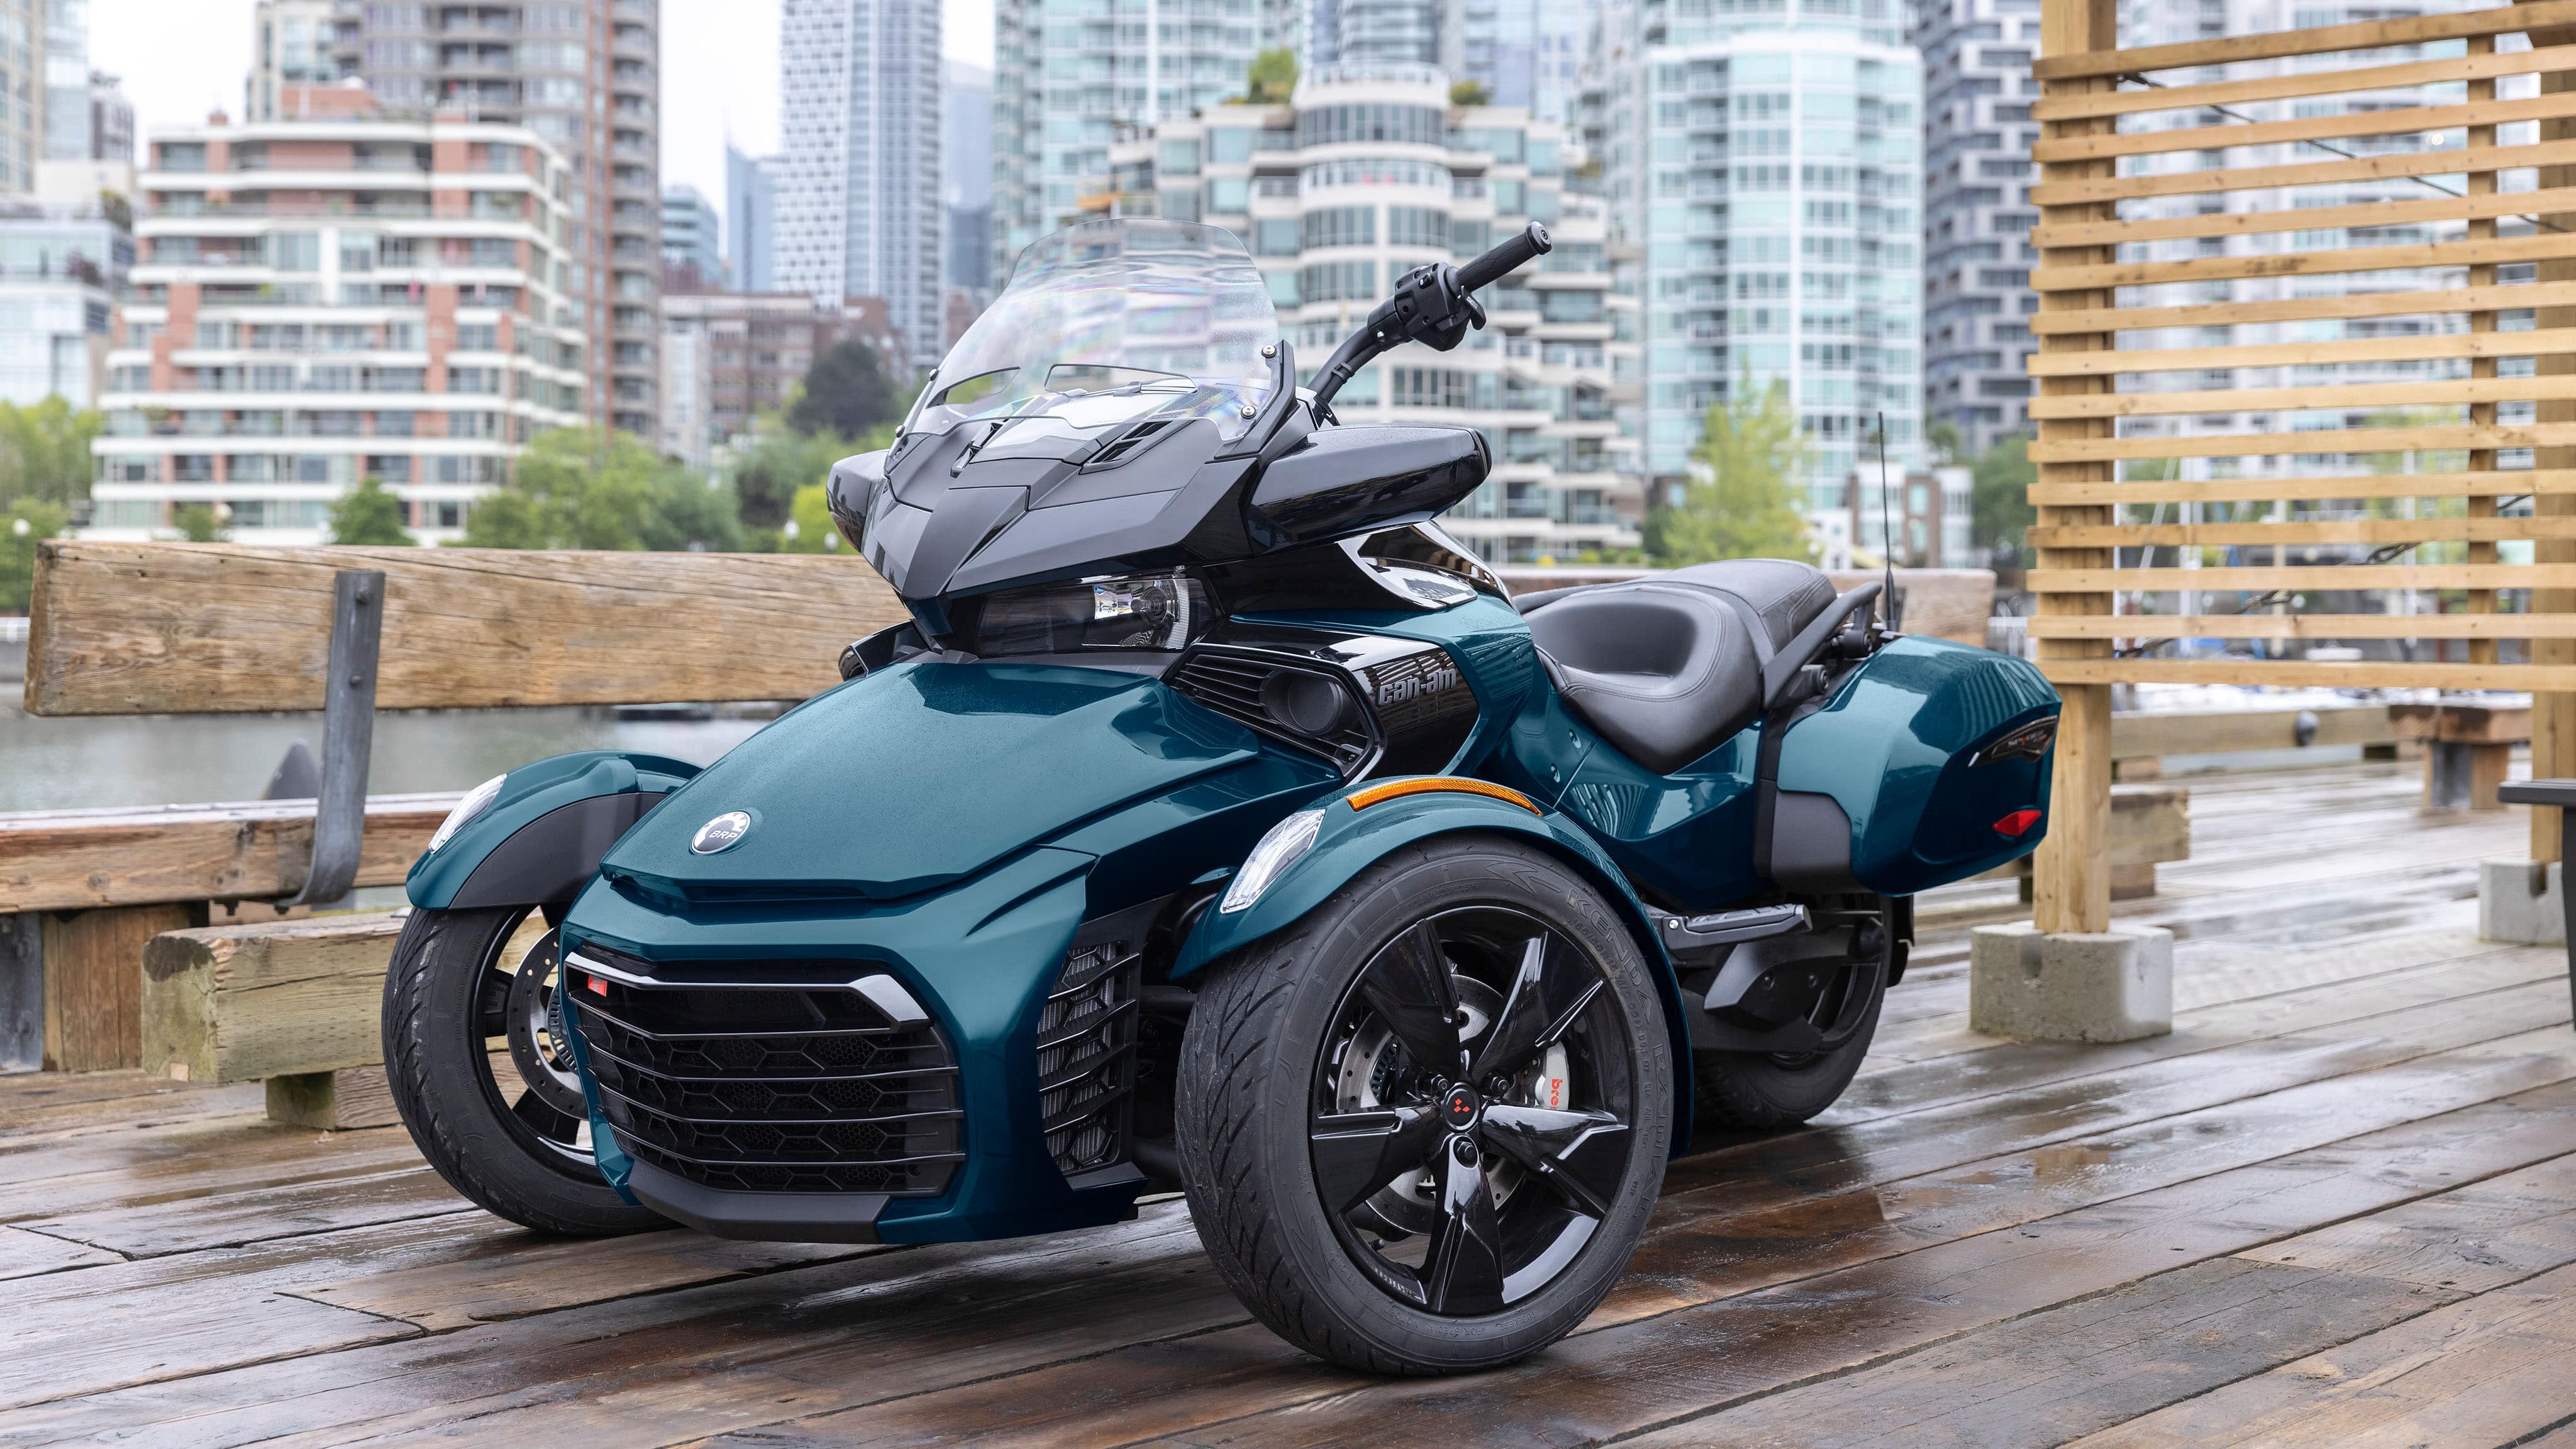 2023 Can-Am Spyder F3 3-wheel motorcycle